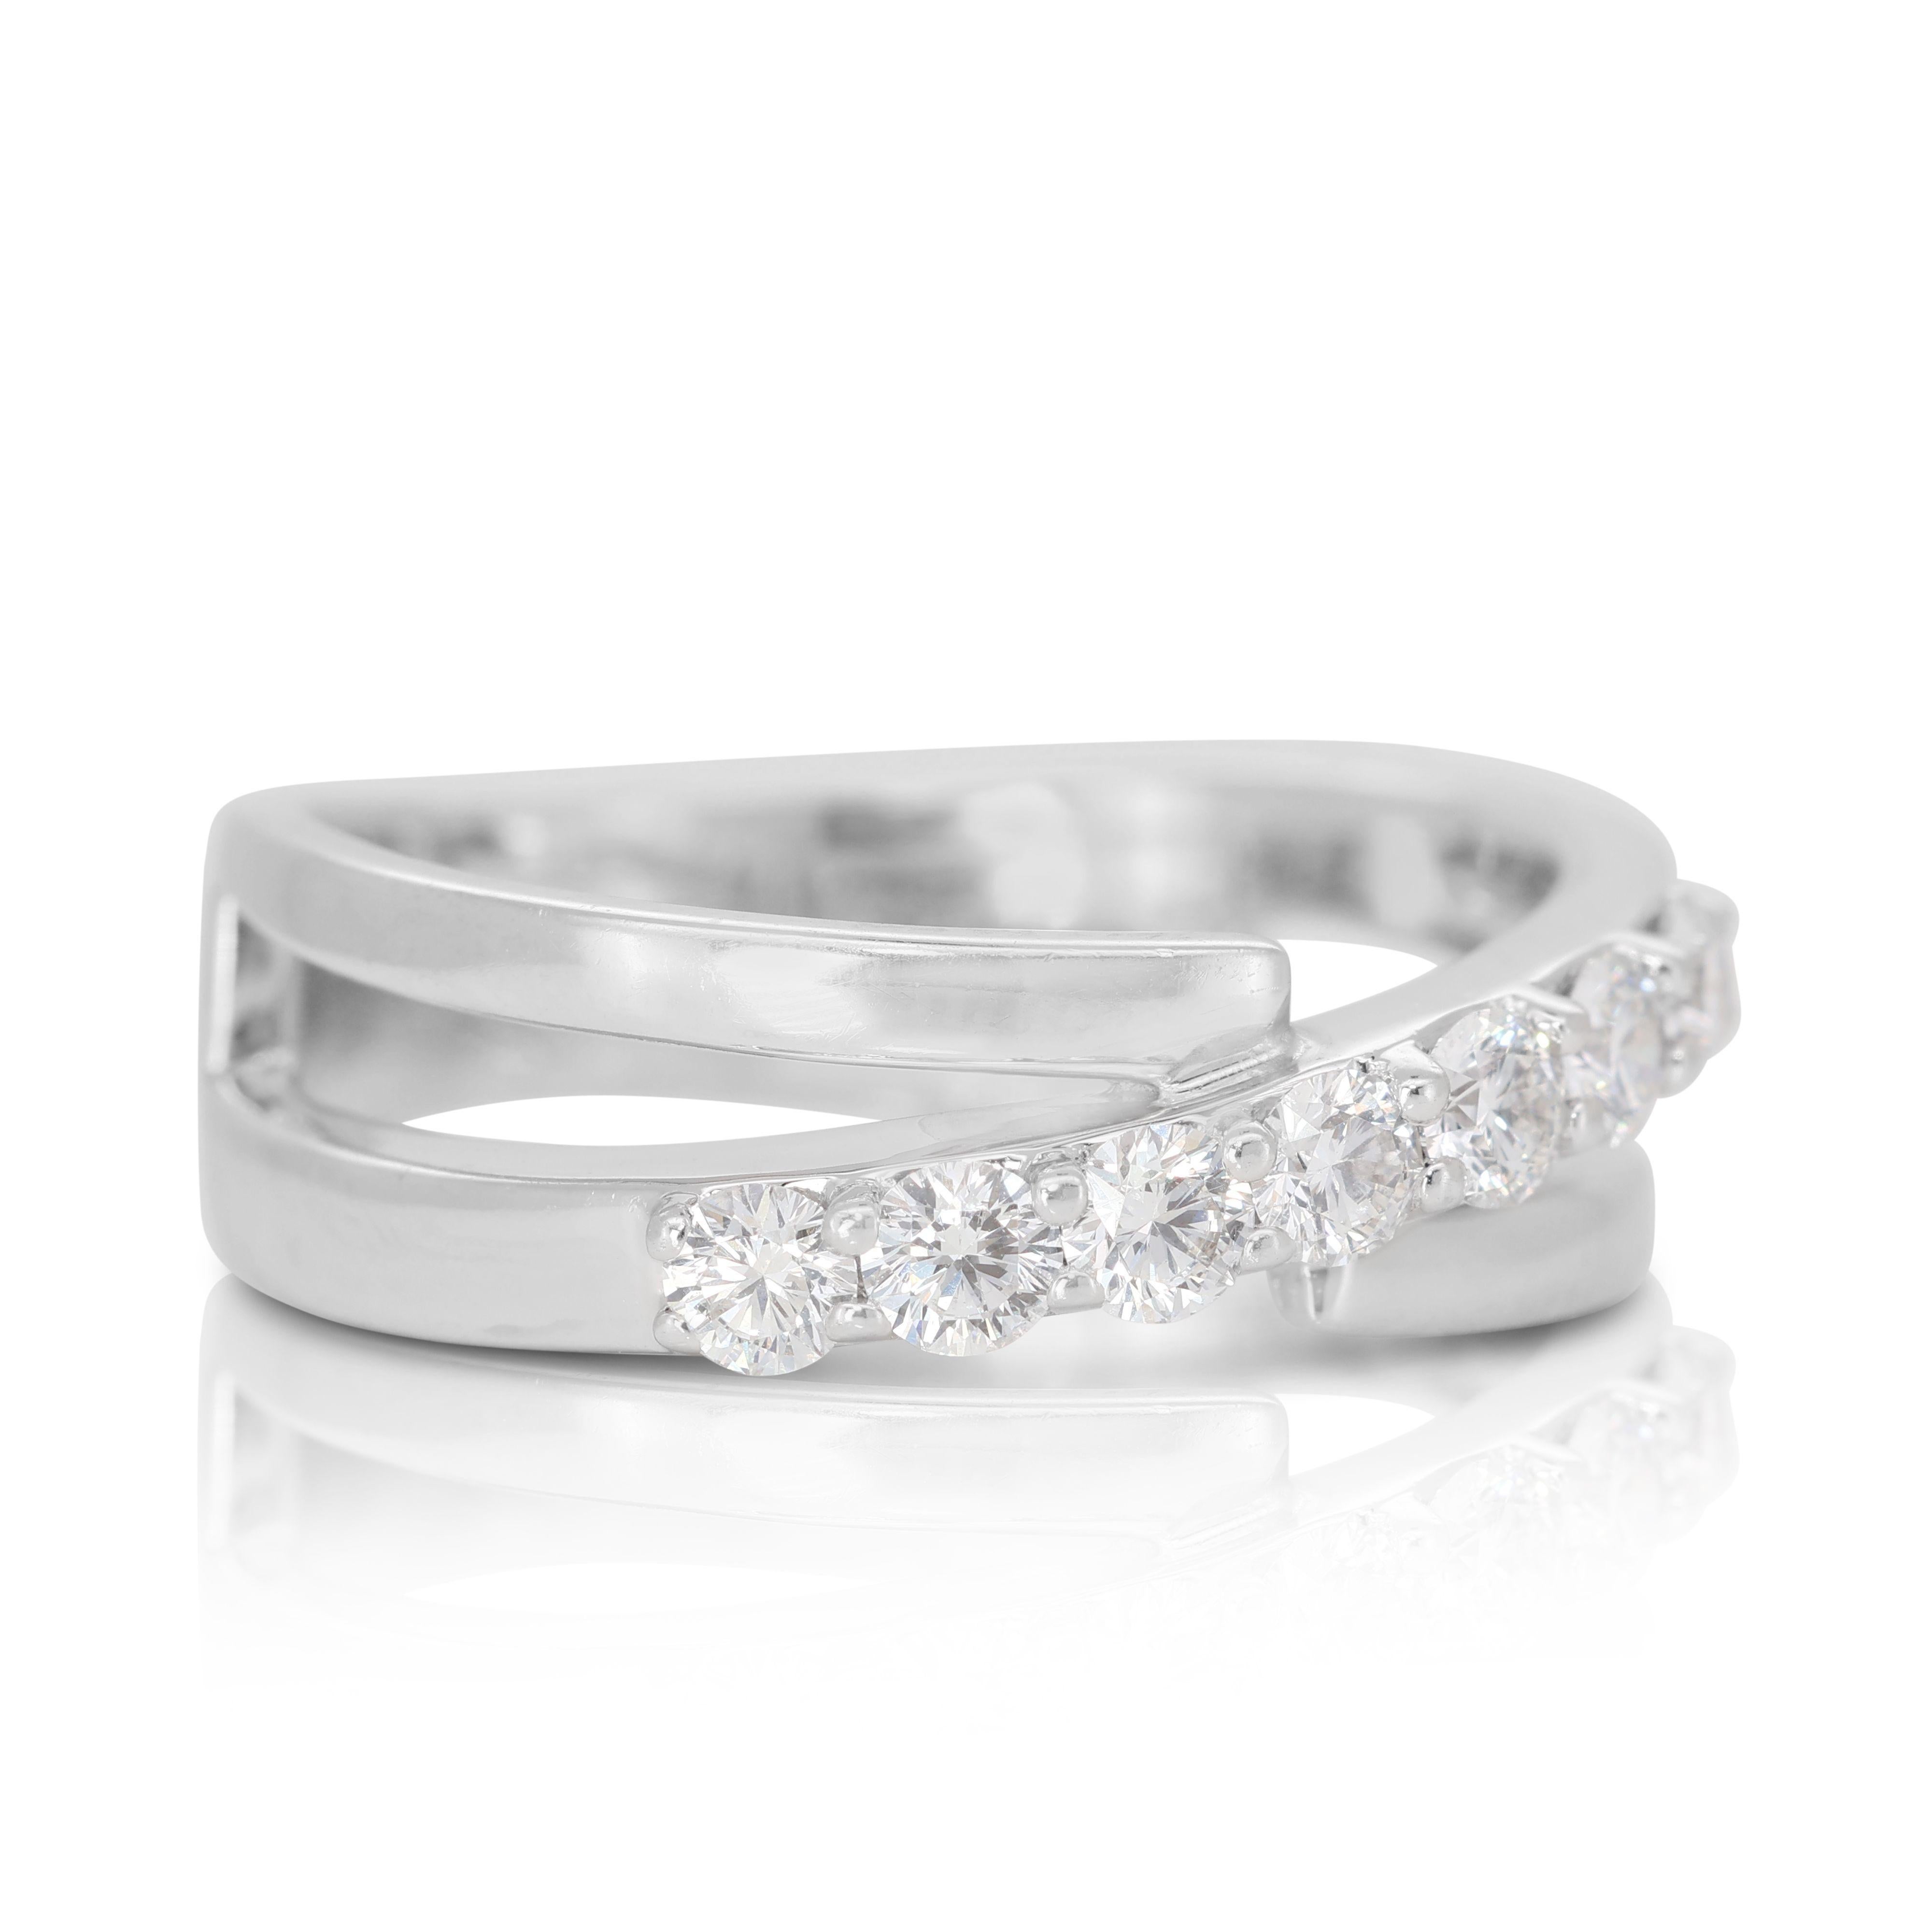 Brilliant Cut Luxurious 18K White Gold Diamond Ring with 0.49 ct Natural Diamonds For Sale